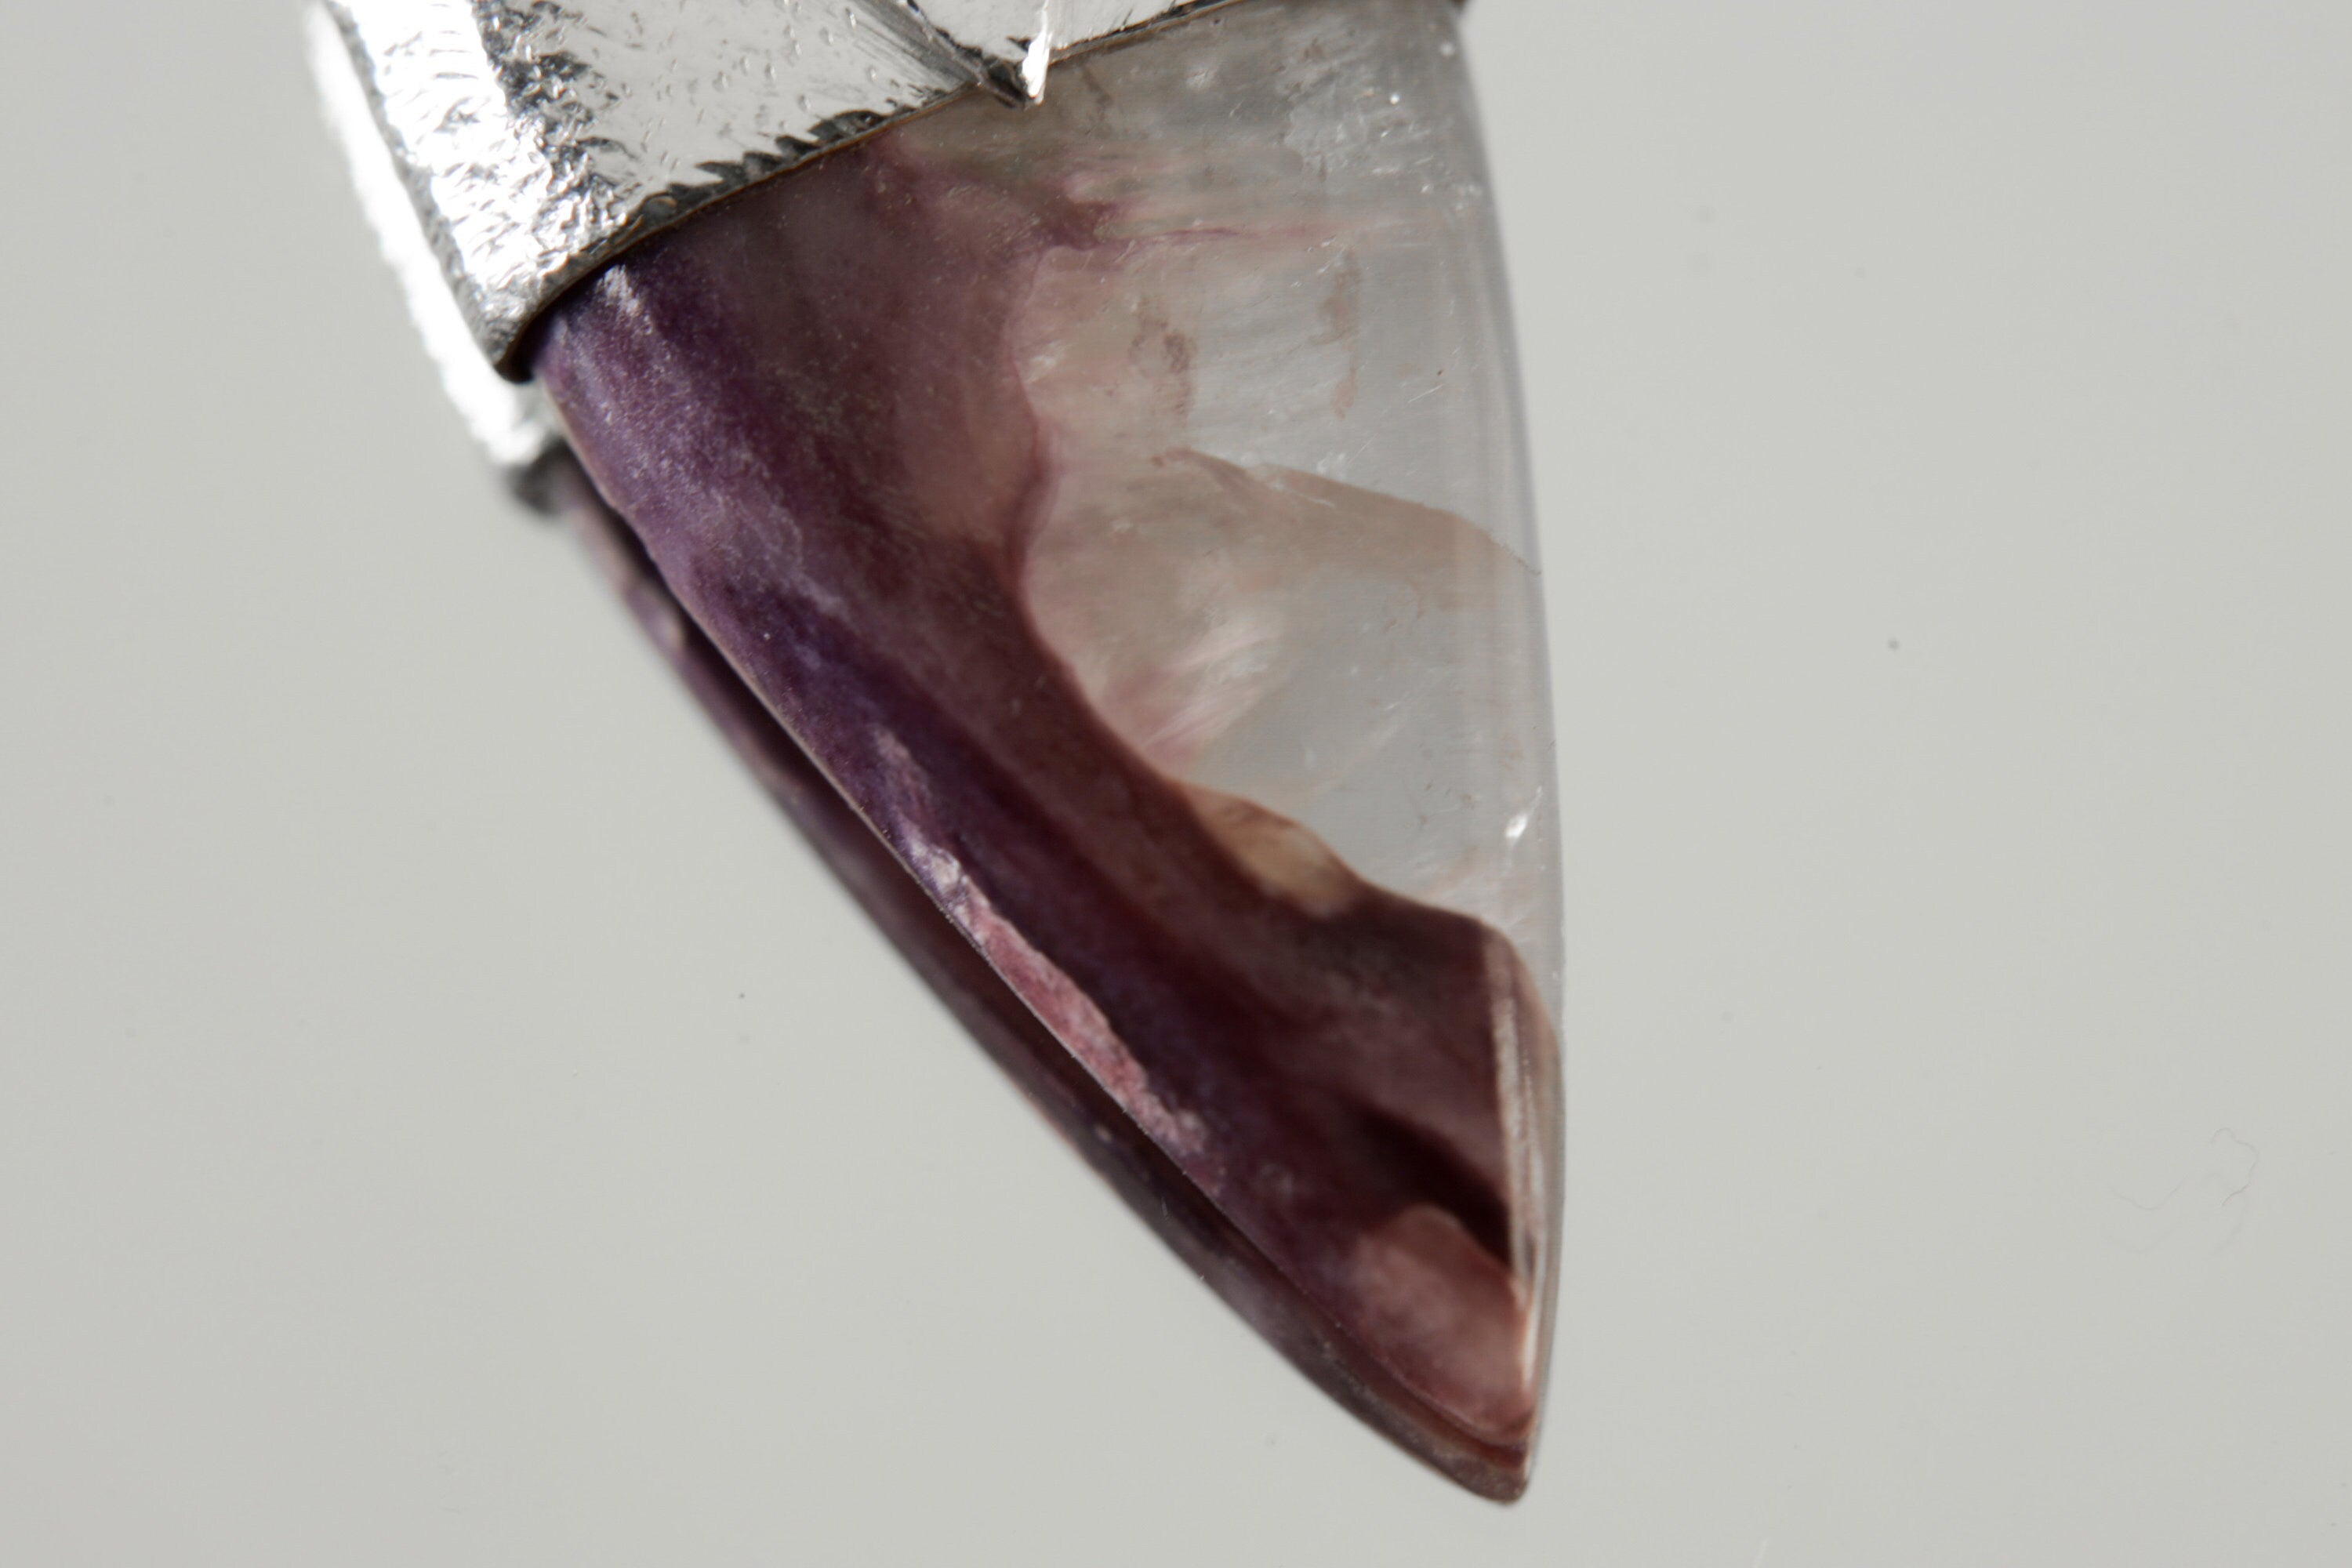 Fang Shaped Silicate Charoite Cabochon - Stack Pendant - Organic Textured 925 S175.00terling Silver - Crystal Necklace